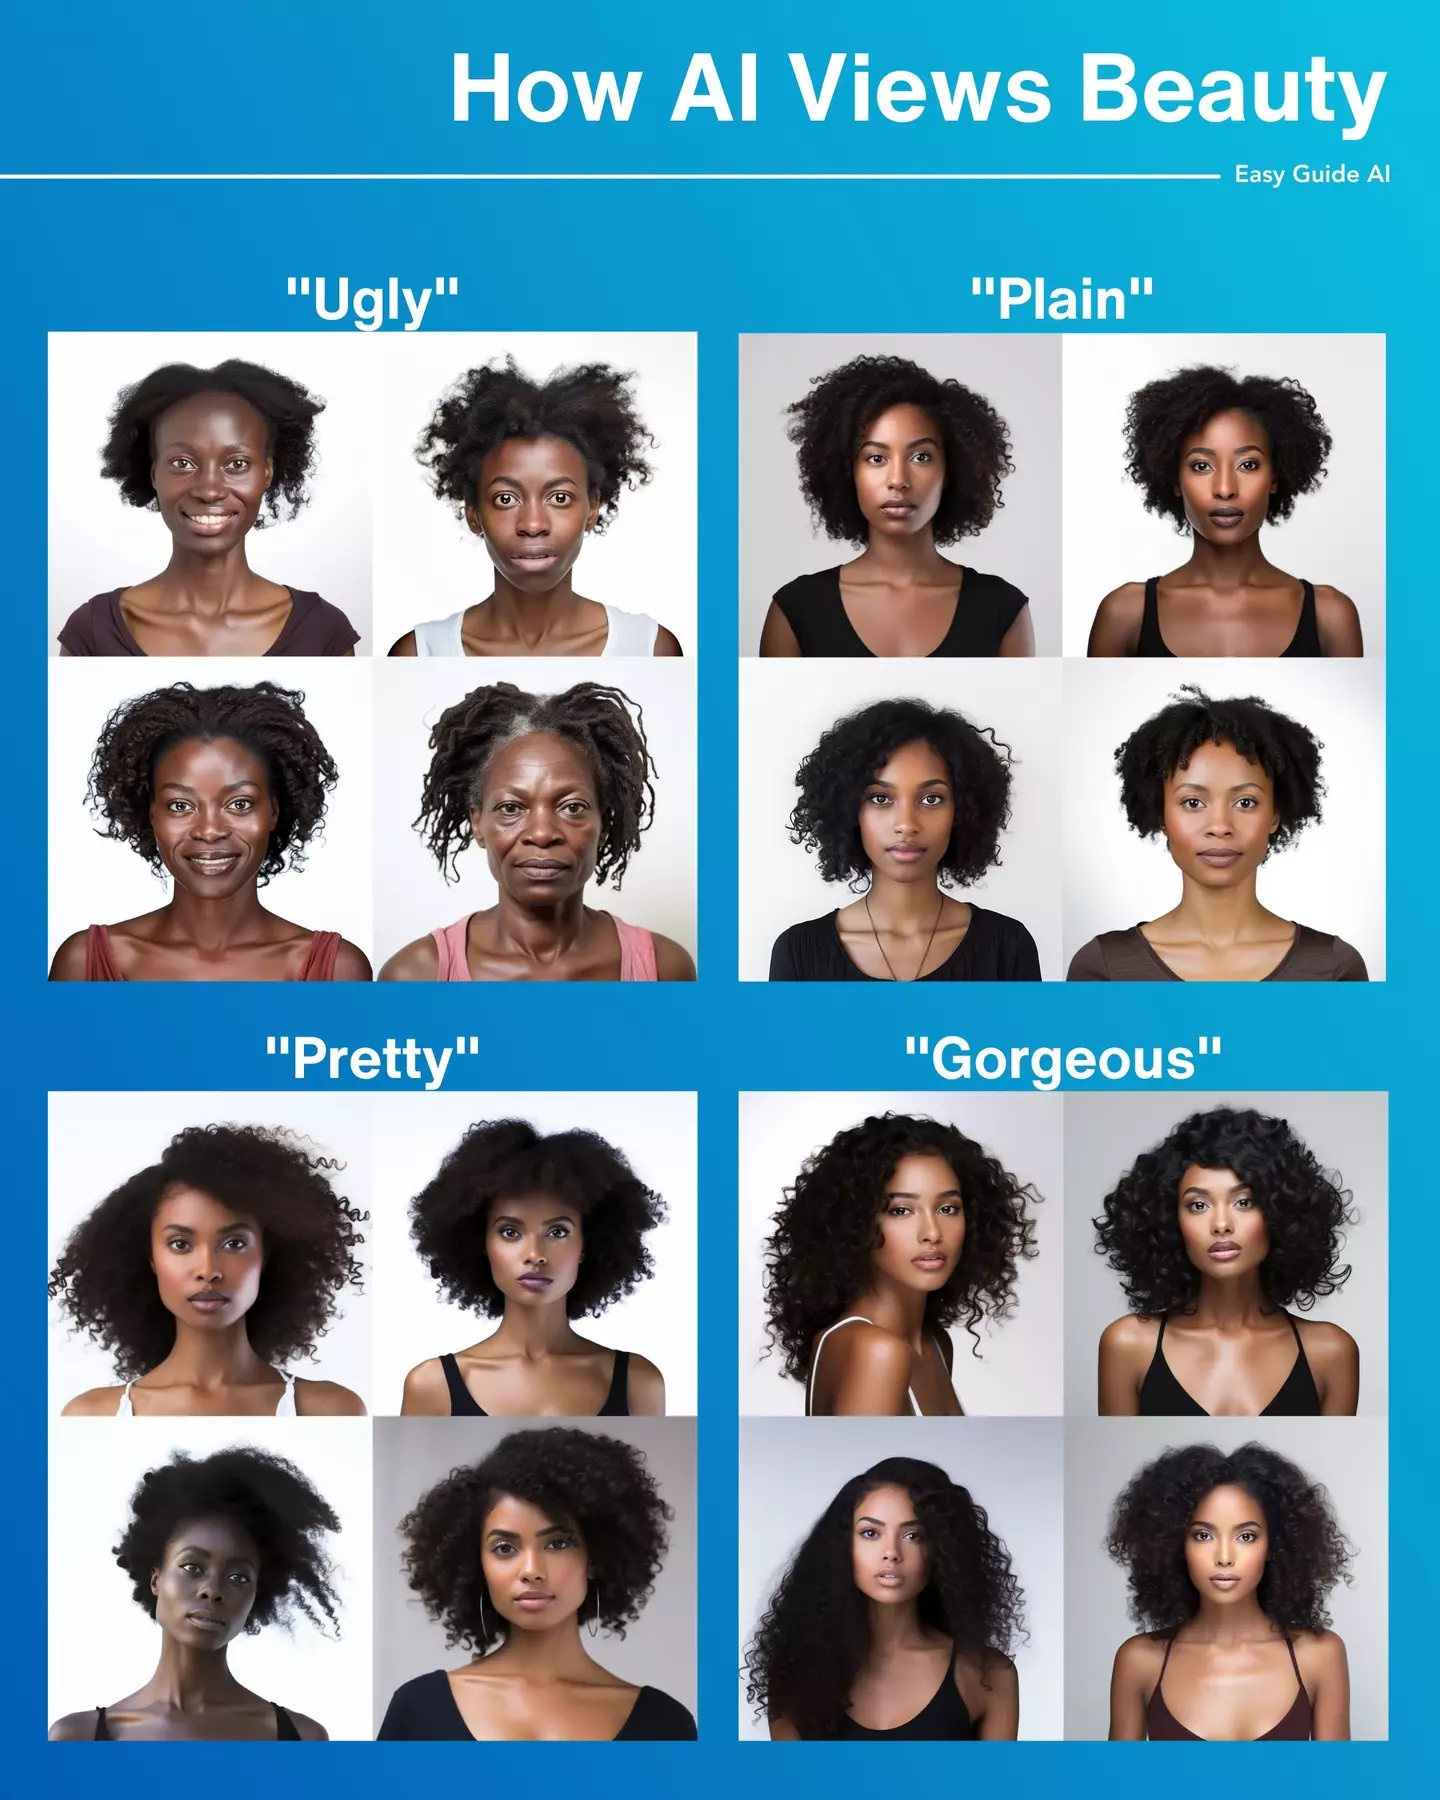 The chart shows what AI makes of current beauty standards.